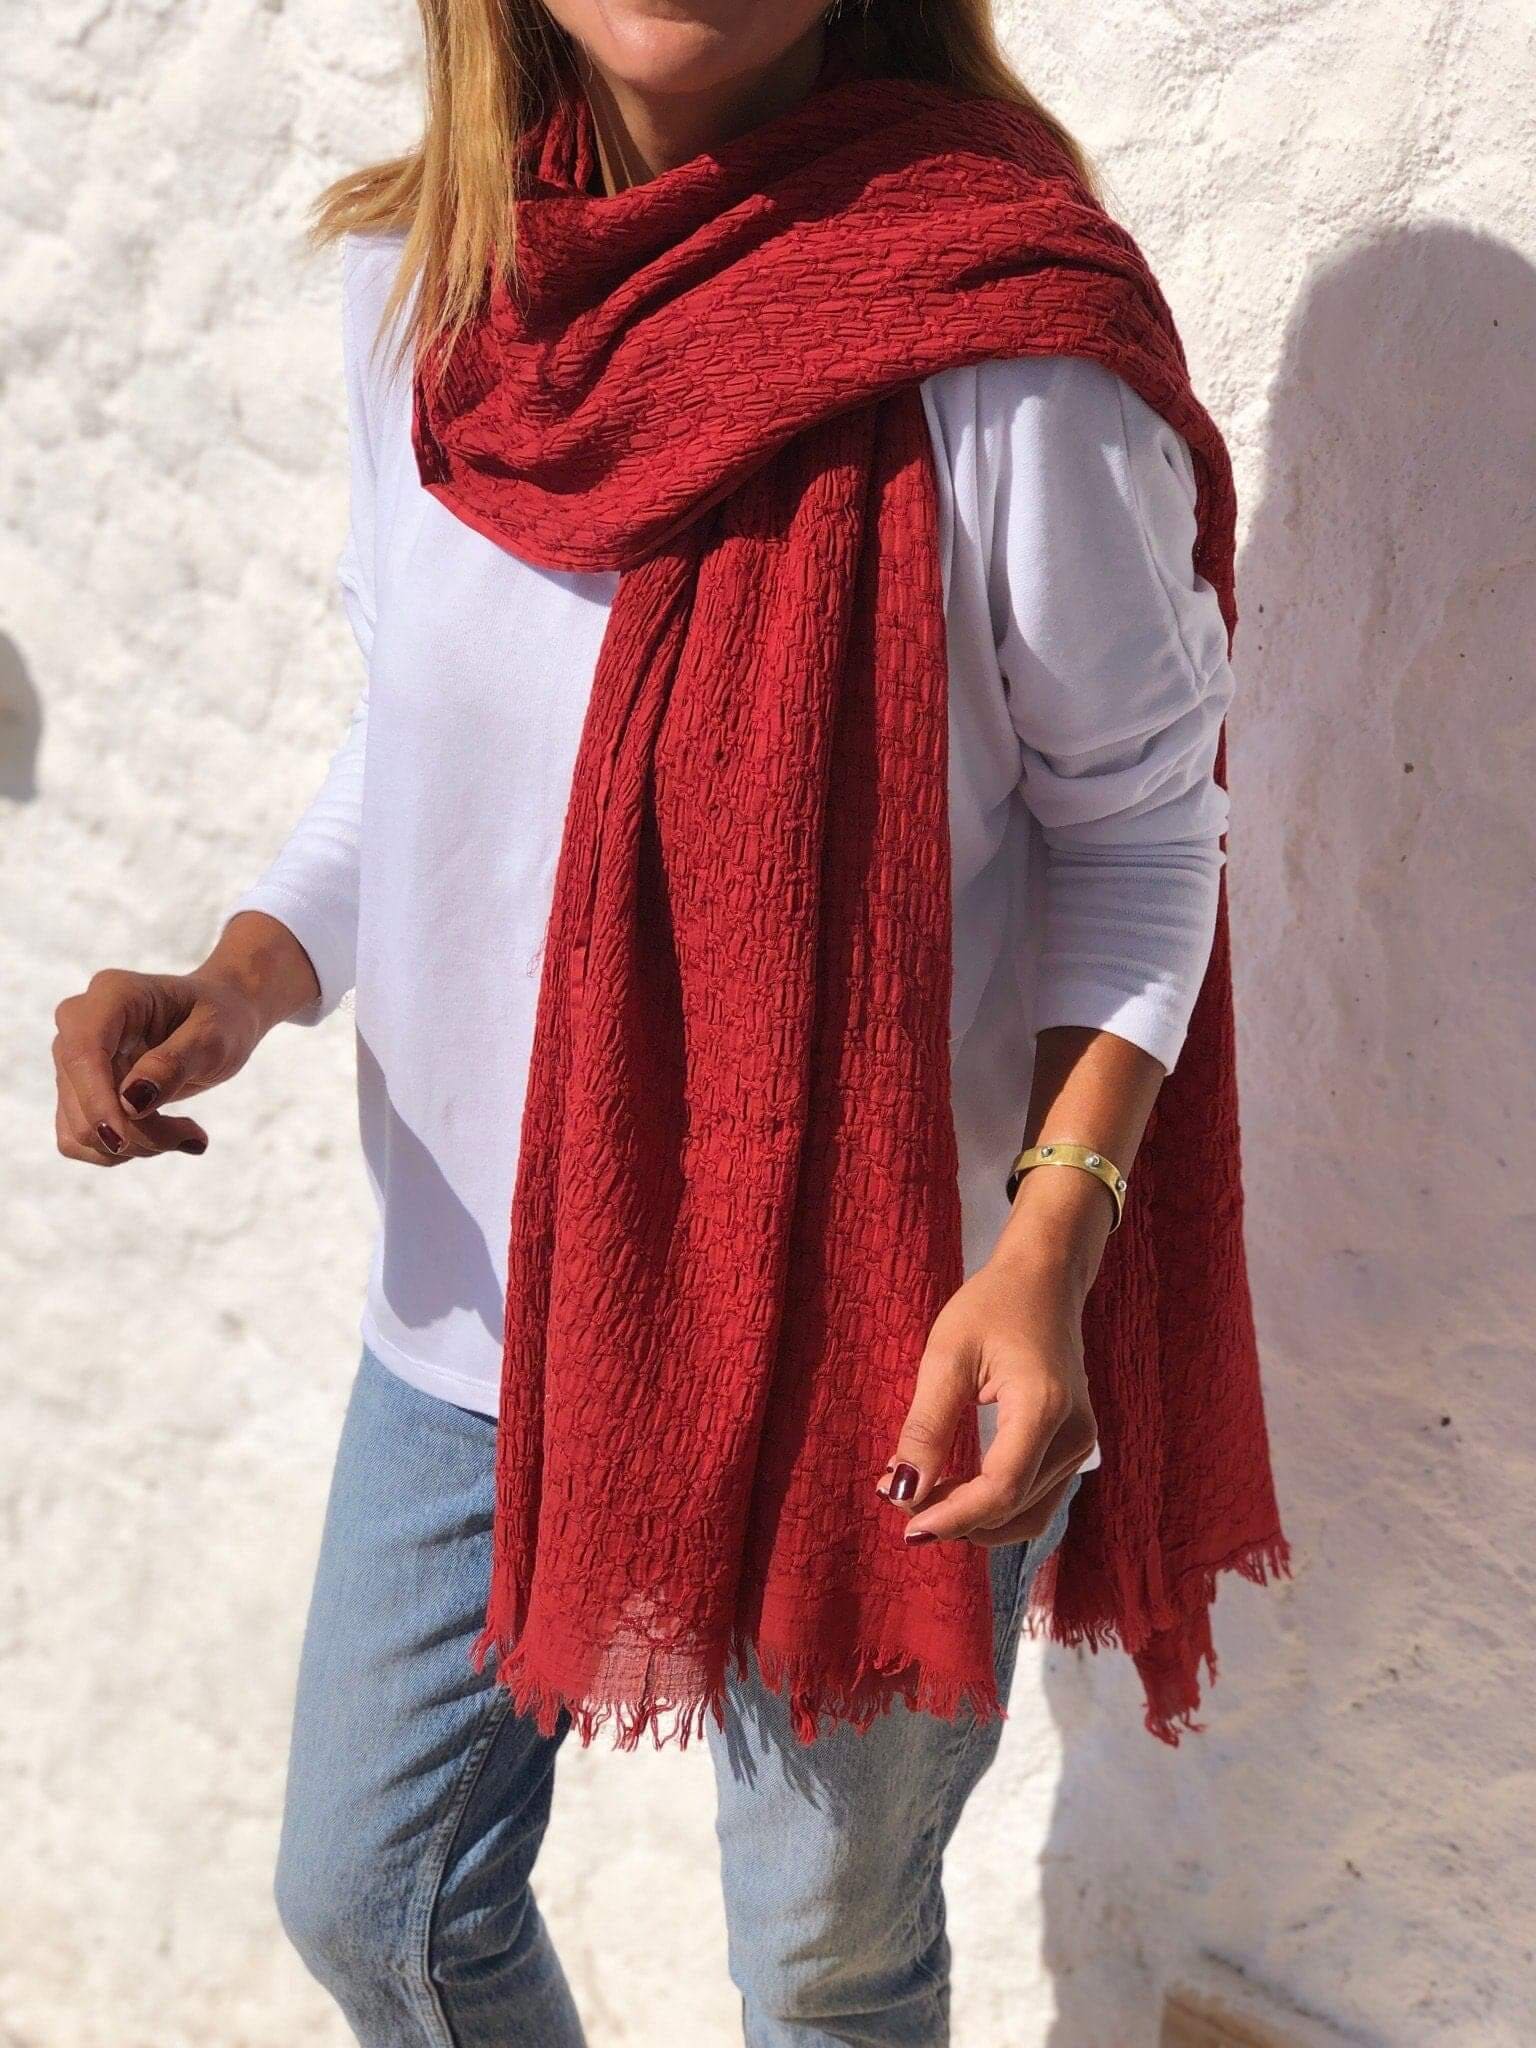 Scarf being a unique fabric worn around the body parts, especially the head or neck, adds elegance to our fashion game. scarves have become an everyday accessory in both male and female wardrobes in modern times.